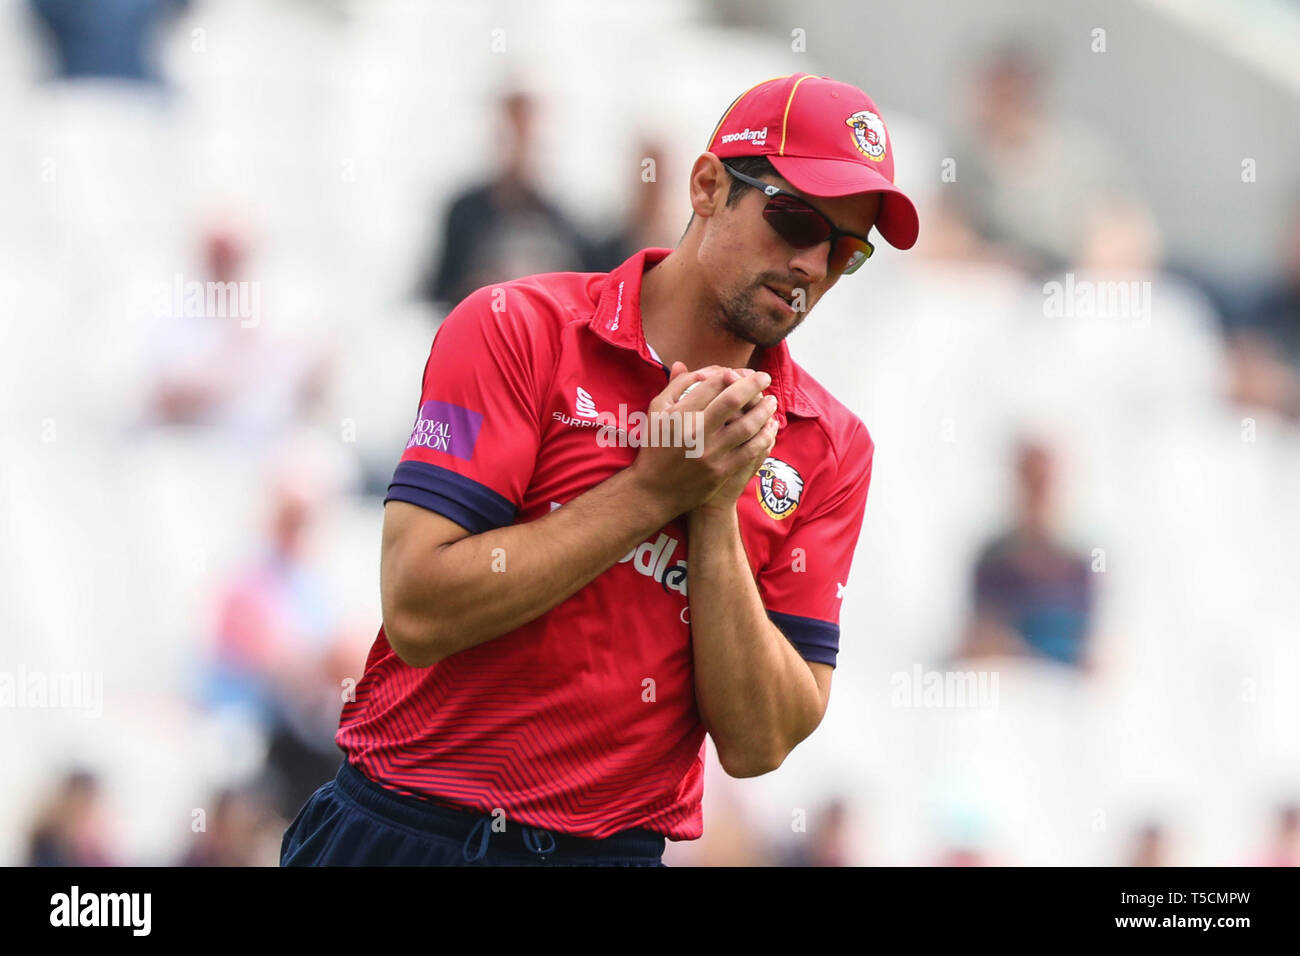 London, UK. 23 April 2019: Sir Alastair Cook of Essex catches the ball to dismiss Will Jacks of Surrey (Not Pictured) during the Surrey v Essex, Royal London One Day Cup match at The Kia Oval. Credit: Mitchell Gunn/ESPA-Images/Alamy Live News Stock Photo